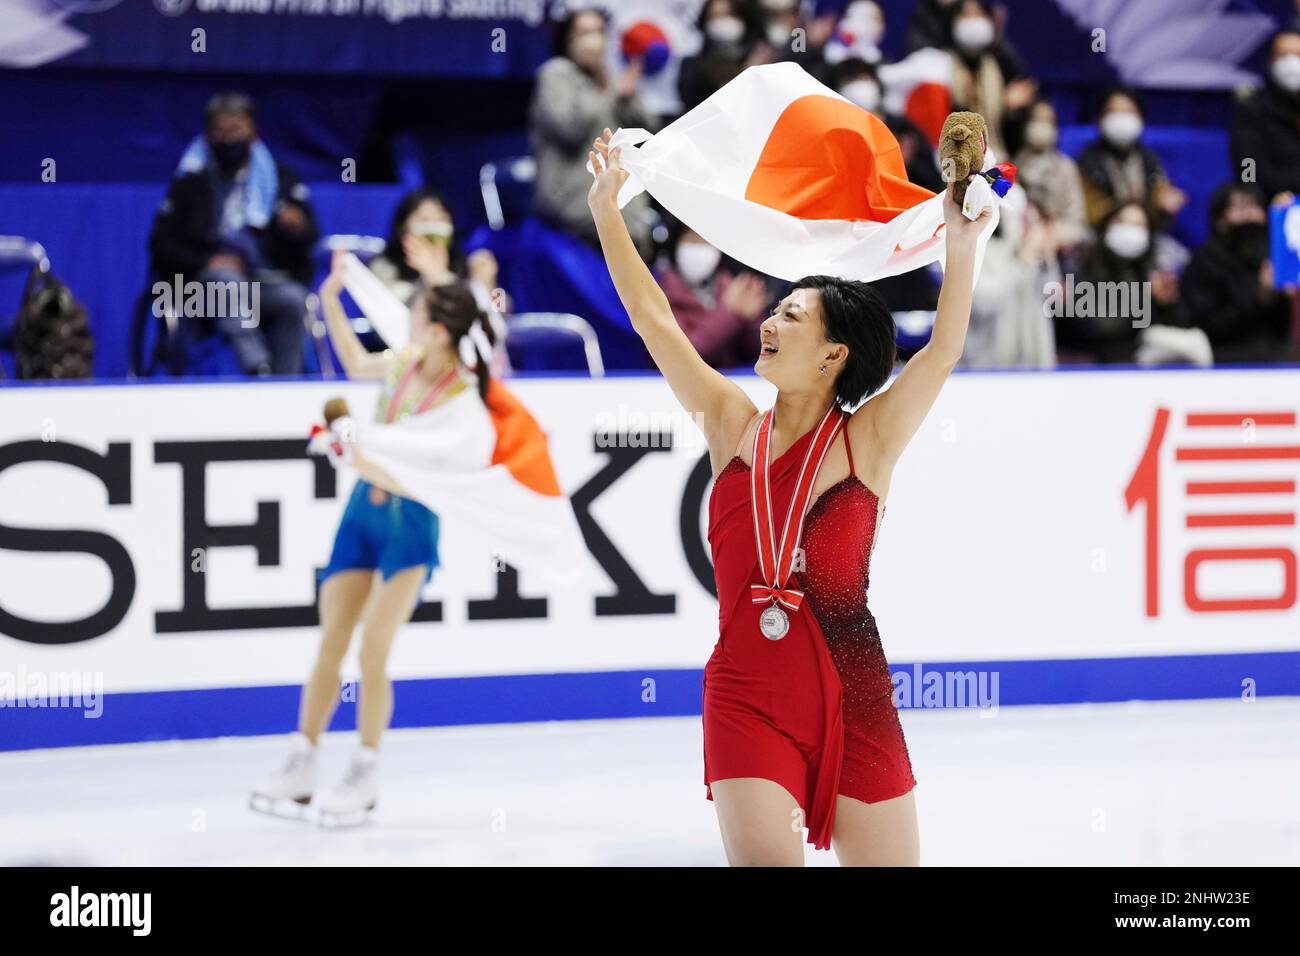 Japans Kaori Sakamoto (R) and Rion Sumiyhoshi celebrate after perfoming a womens free skating of the NHK Trophy at Makomanai Sekisui Heim Ice Arena in Sapporo, Hokkaido Prefecture on Nov